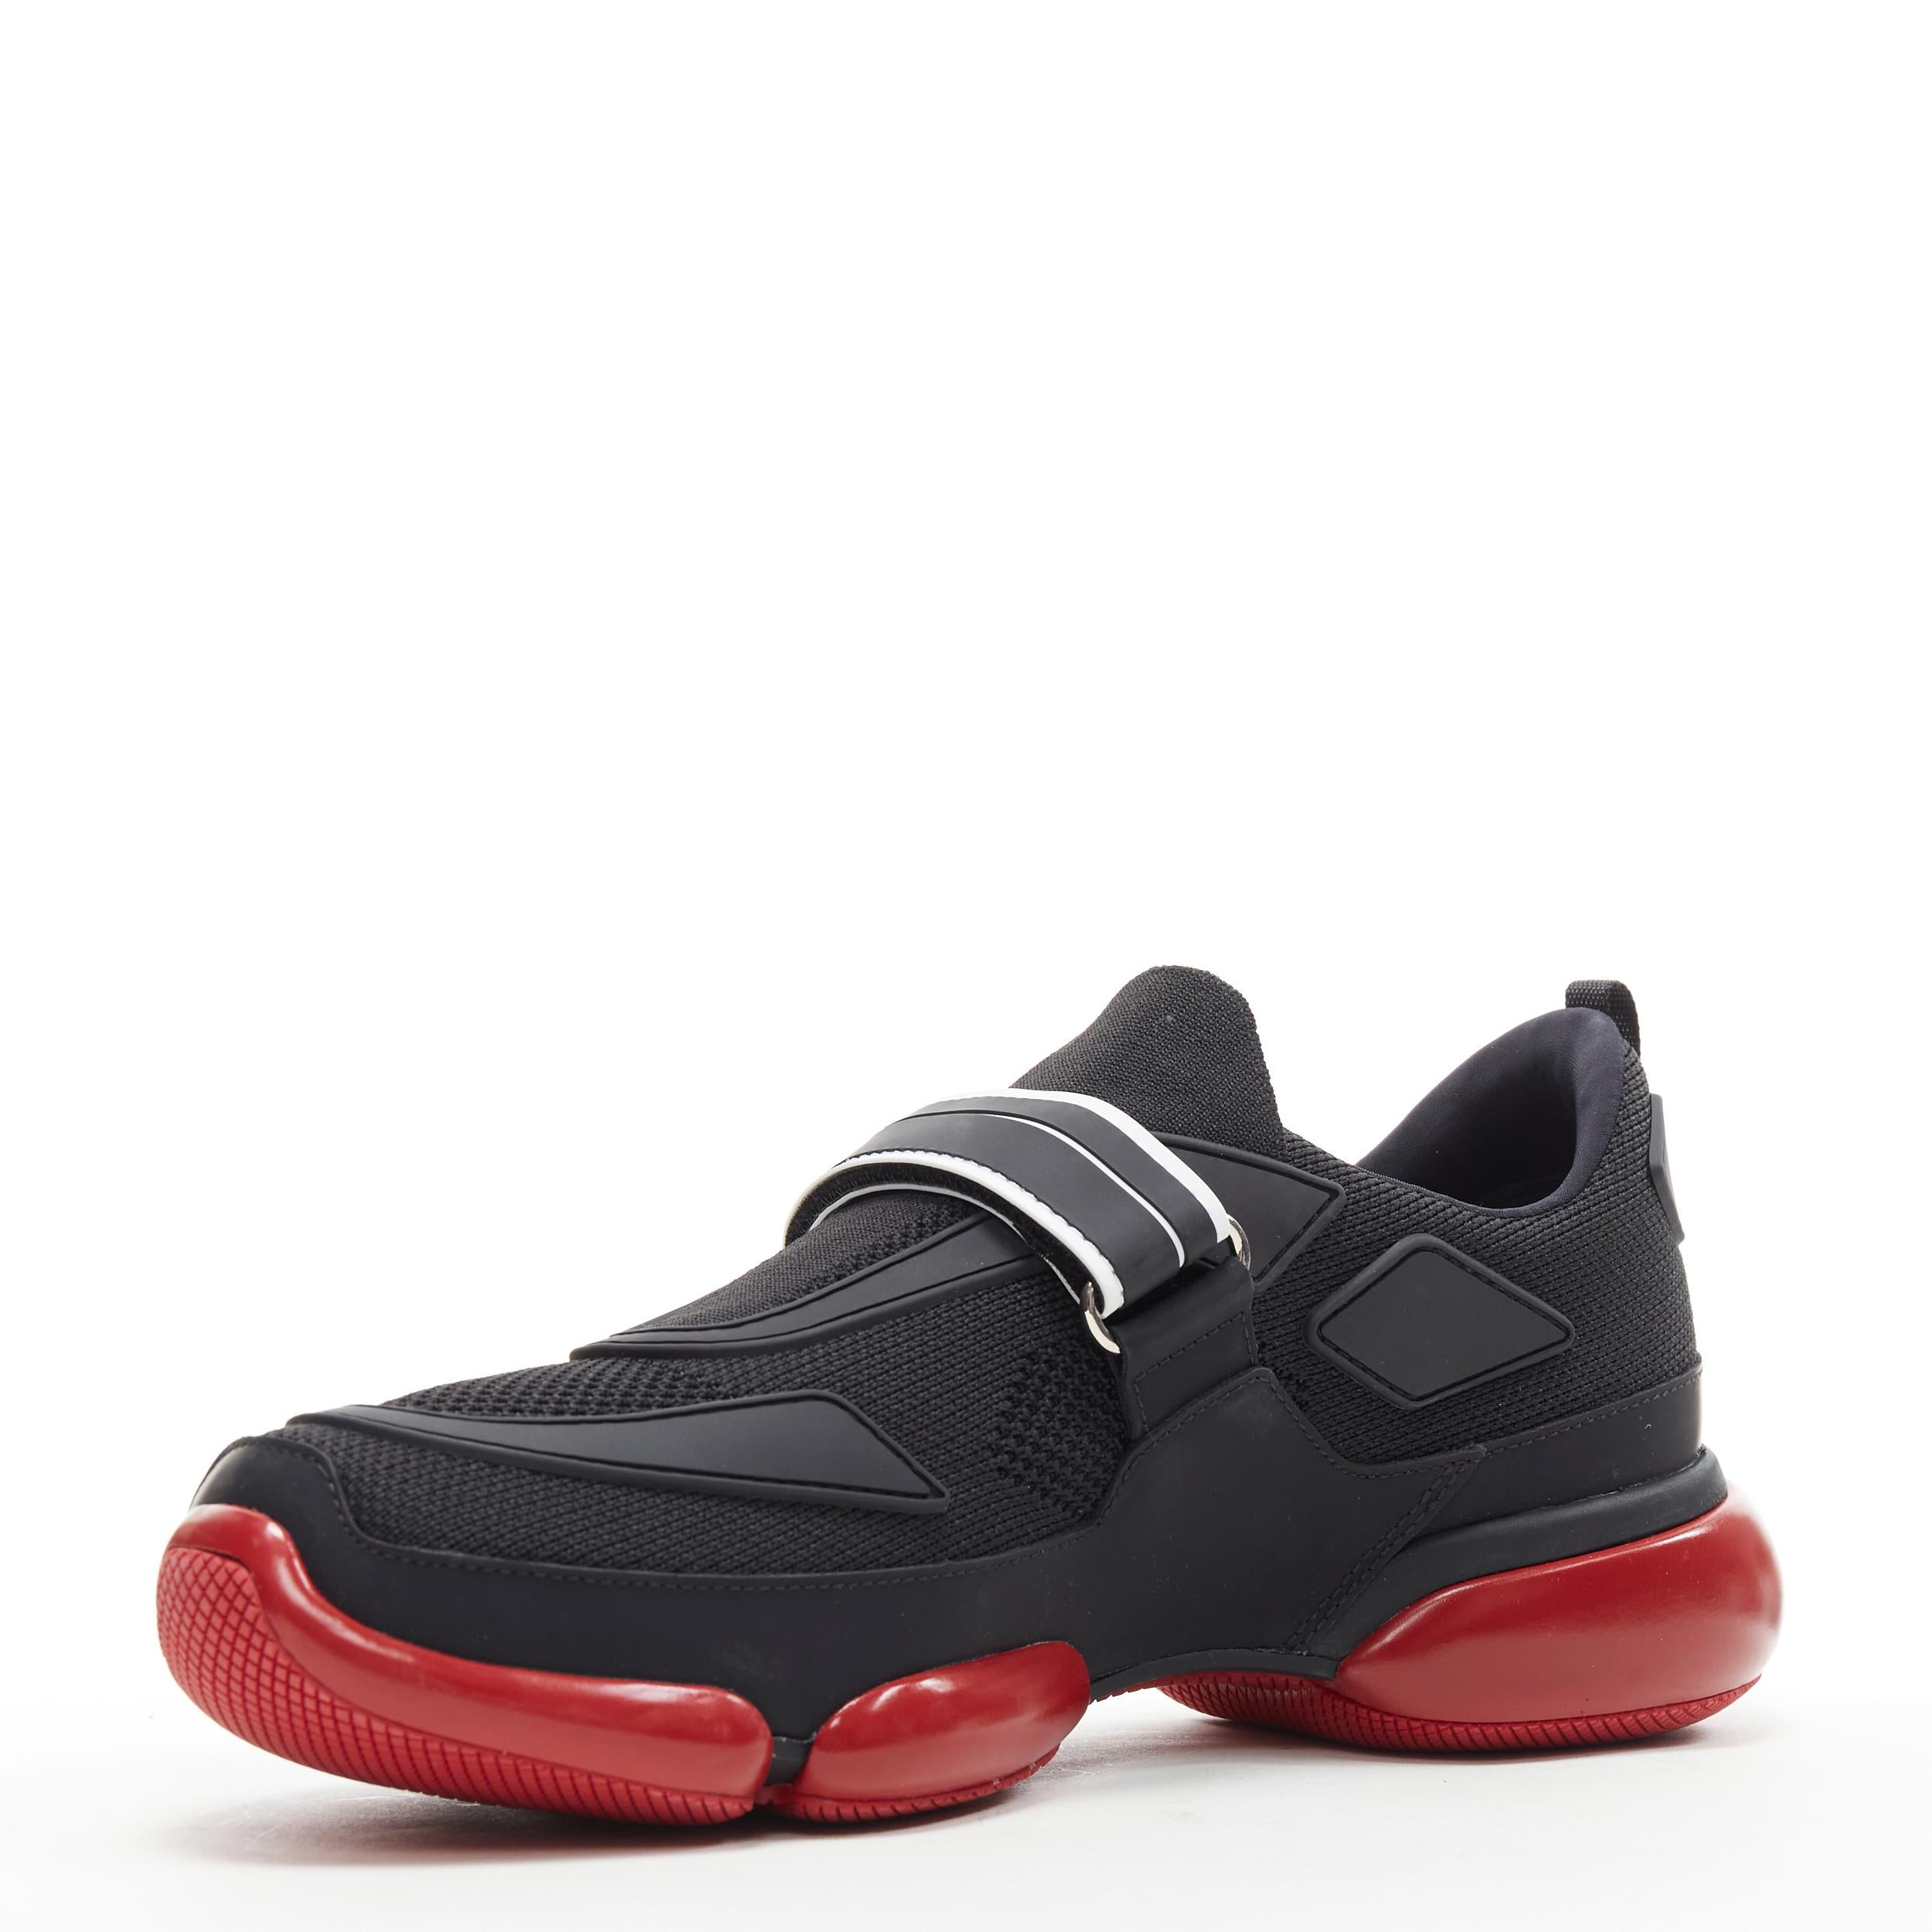 new PRADA Cloudbust black red logo rubber strapped low top 